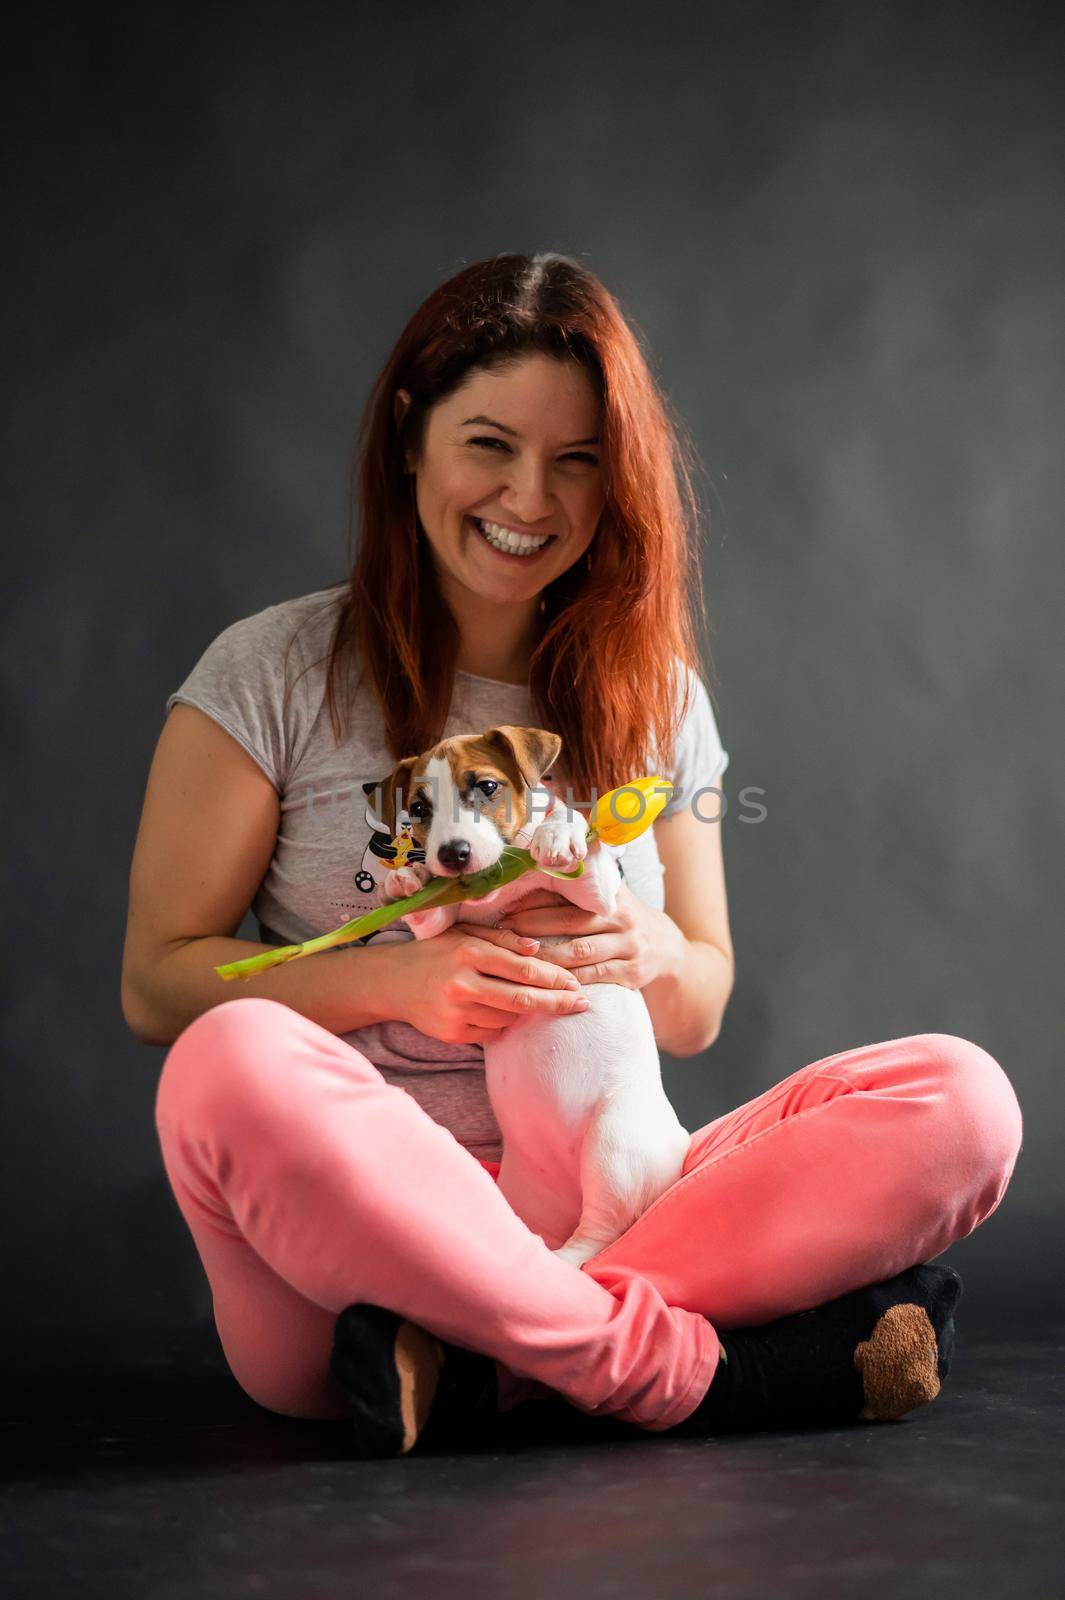 Happy smiling red-haired woman holding a small funny puppy with a yellow tulip in it mouth. The joyful owner plays with the dog Jack Russell Terrier on a black background.